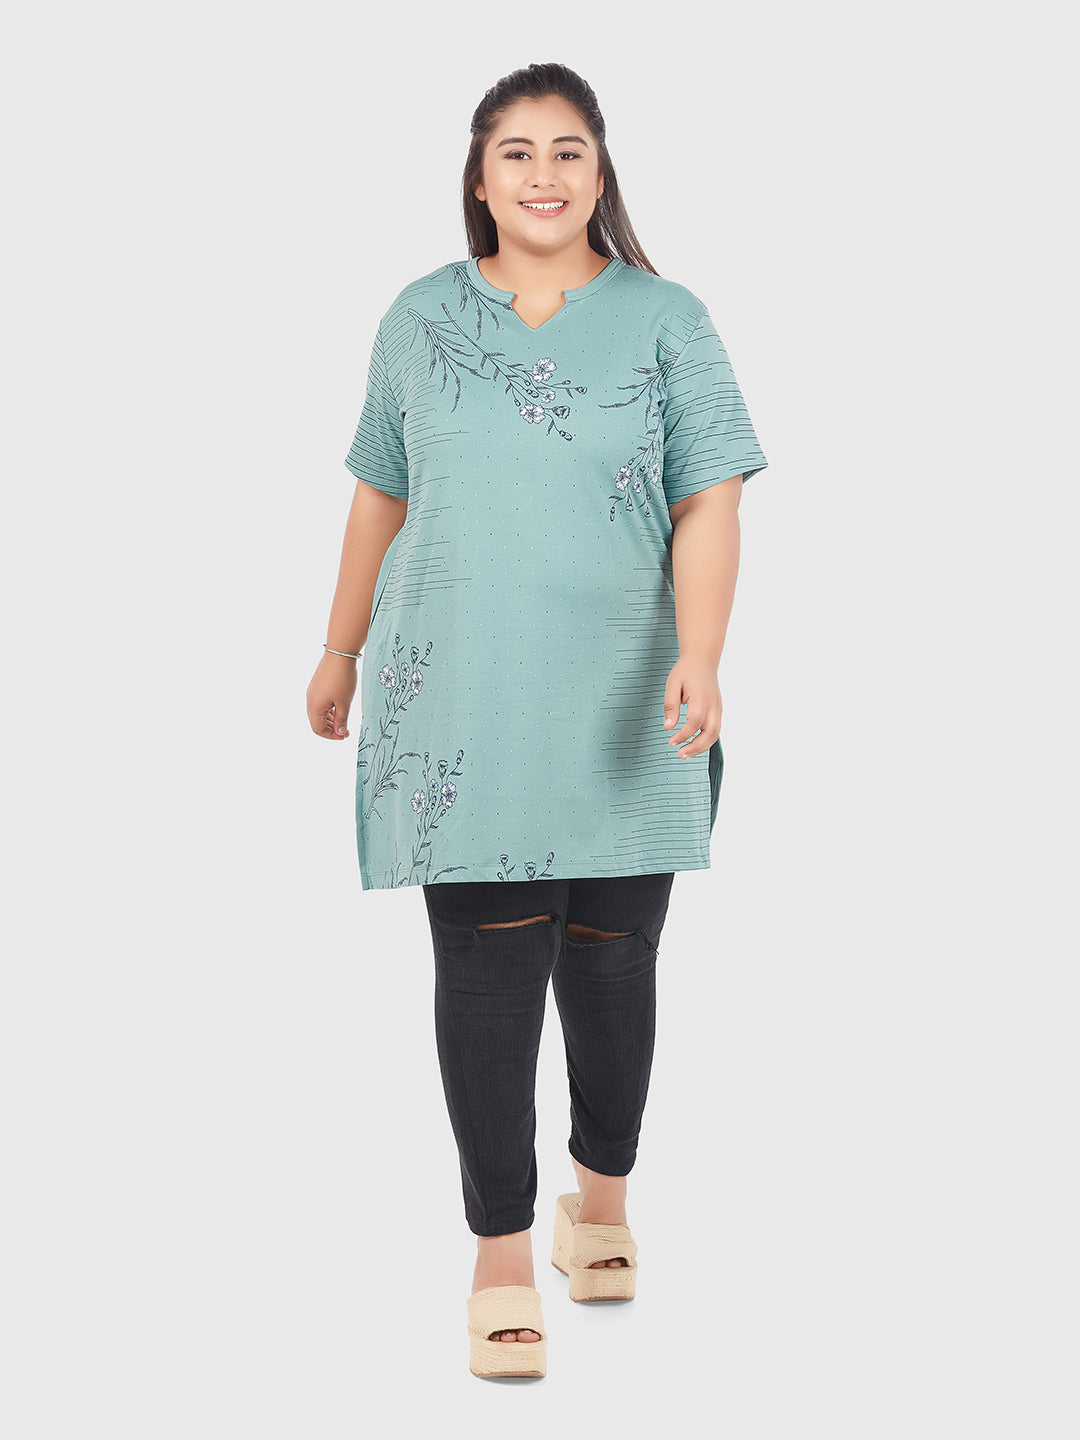 Comfortable Sage Half Sleeves Printed Long Tops For Women In Plus Size